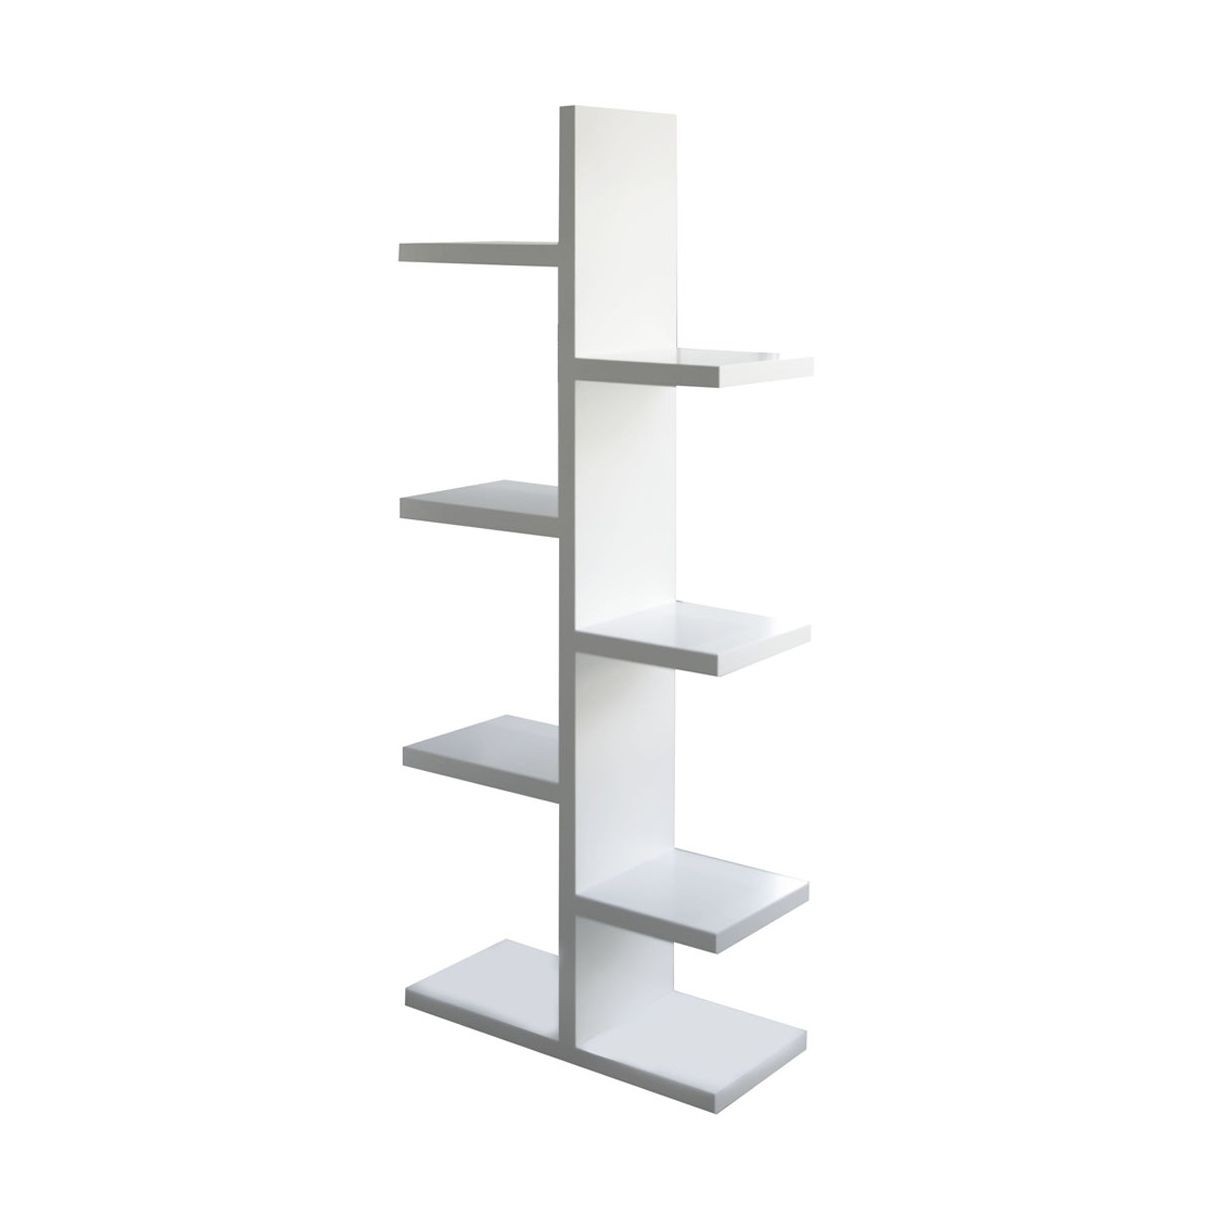 Image result for cb2 spine bookcase shelves wall